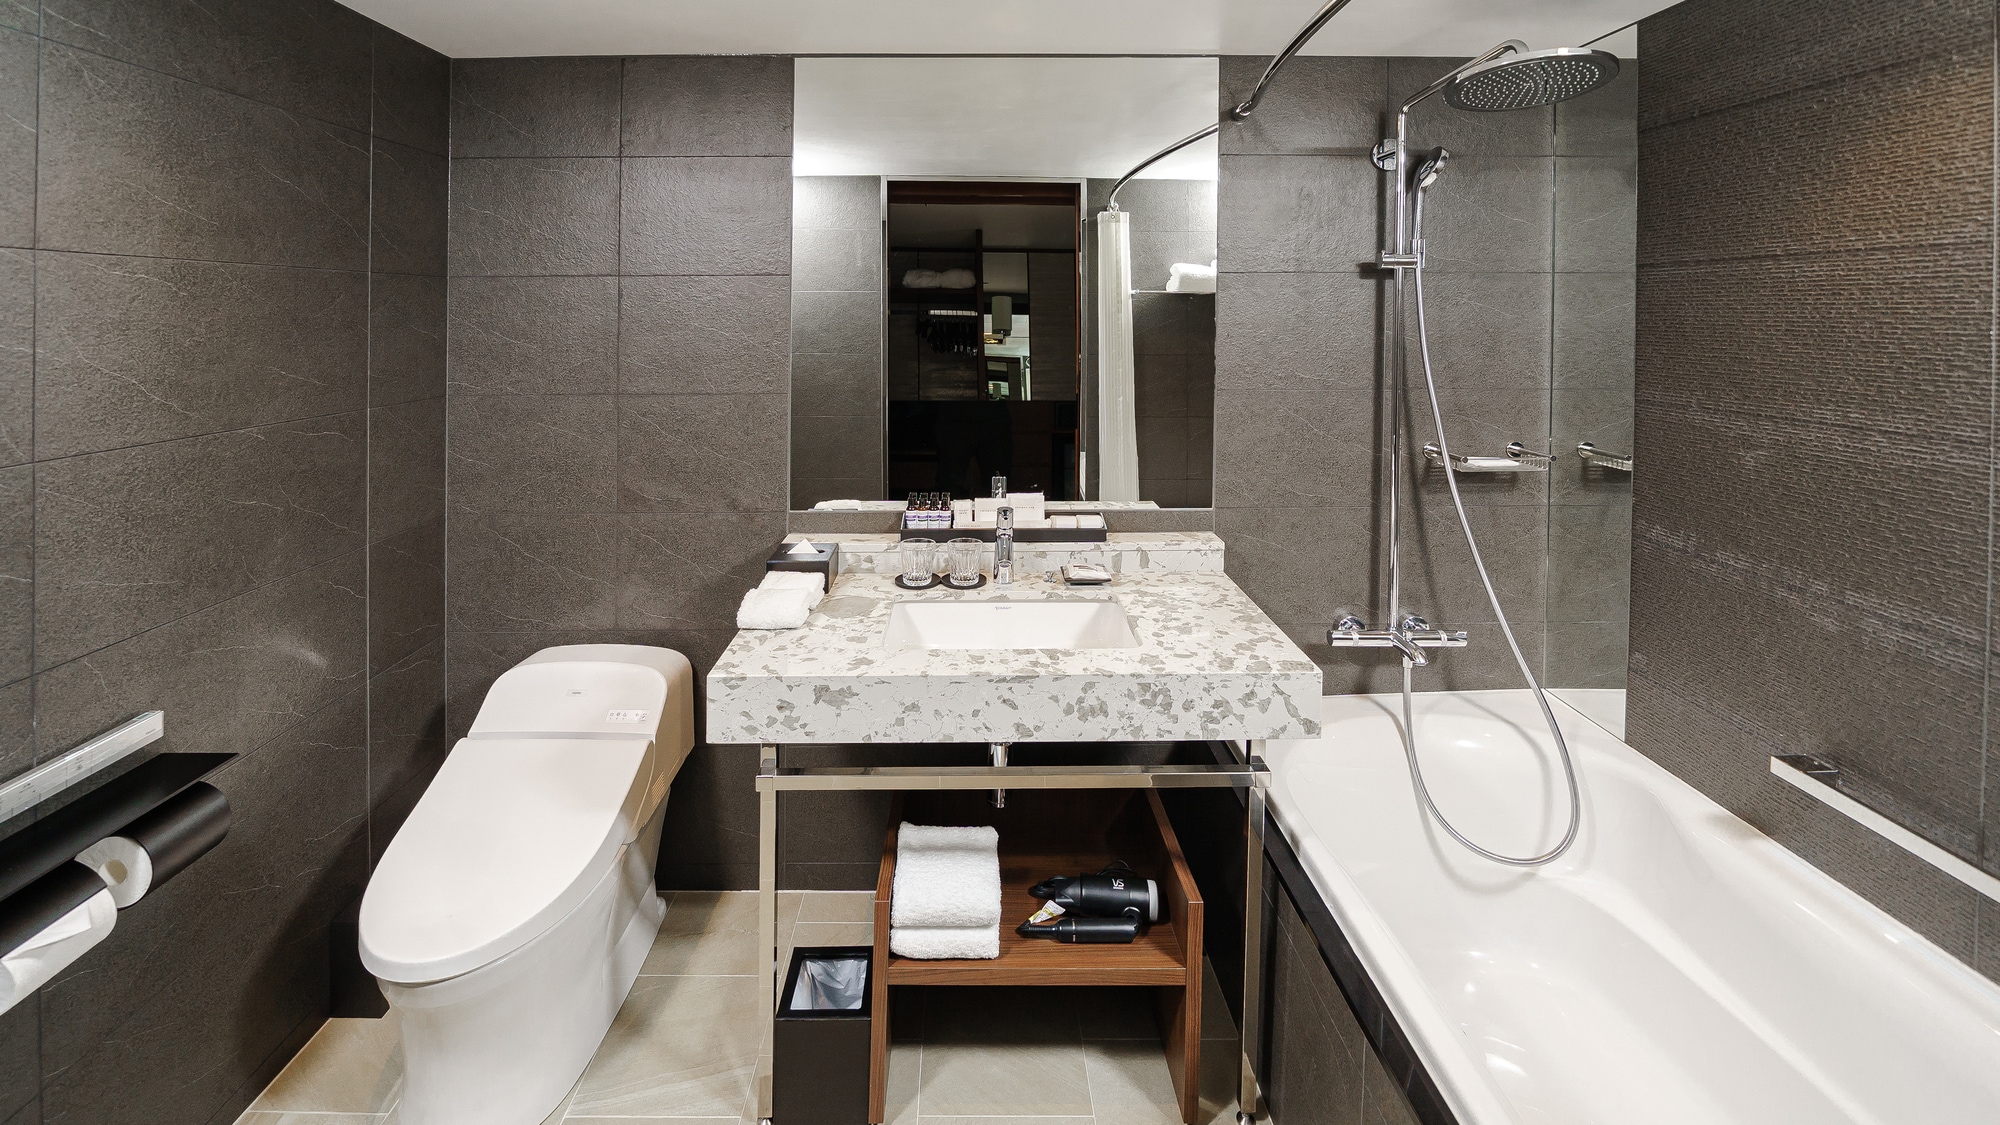 A functional 3-point unit bath is used in the bathroom of the standard corner king.